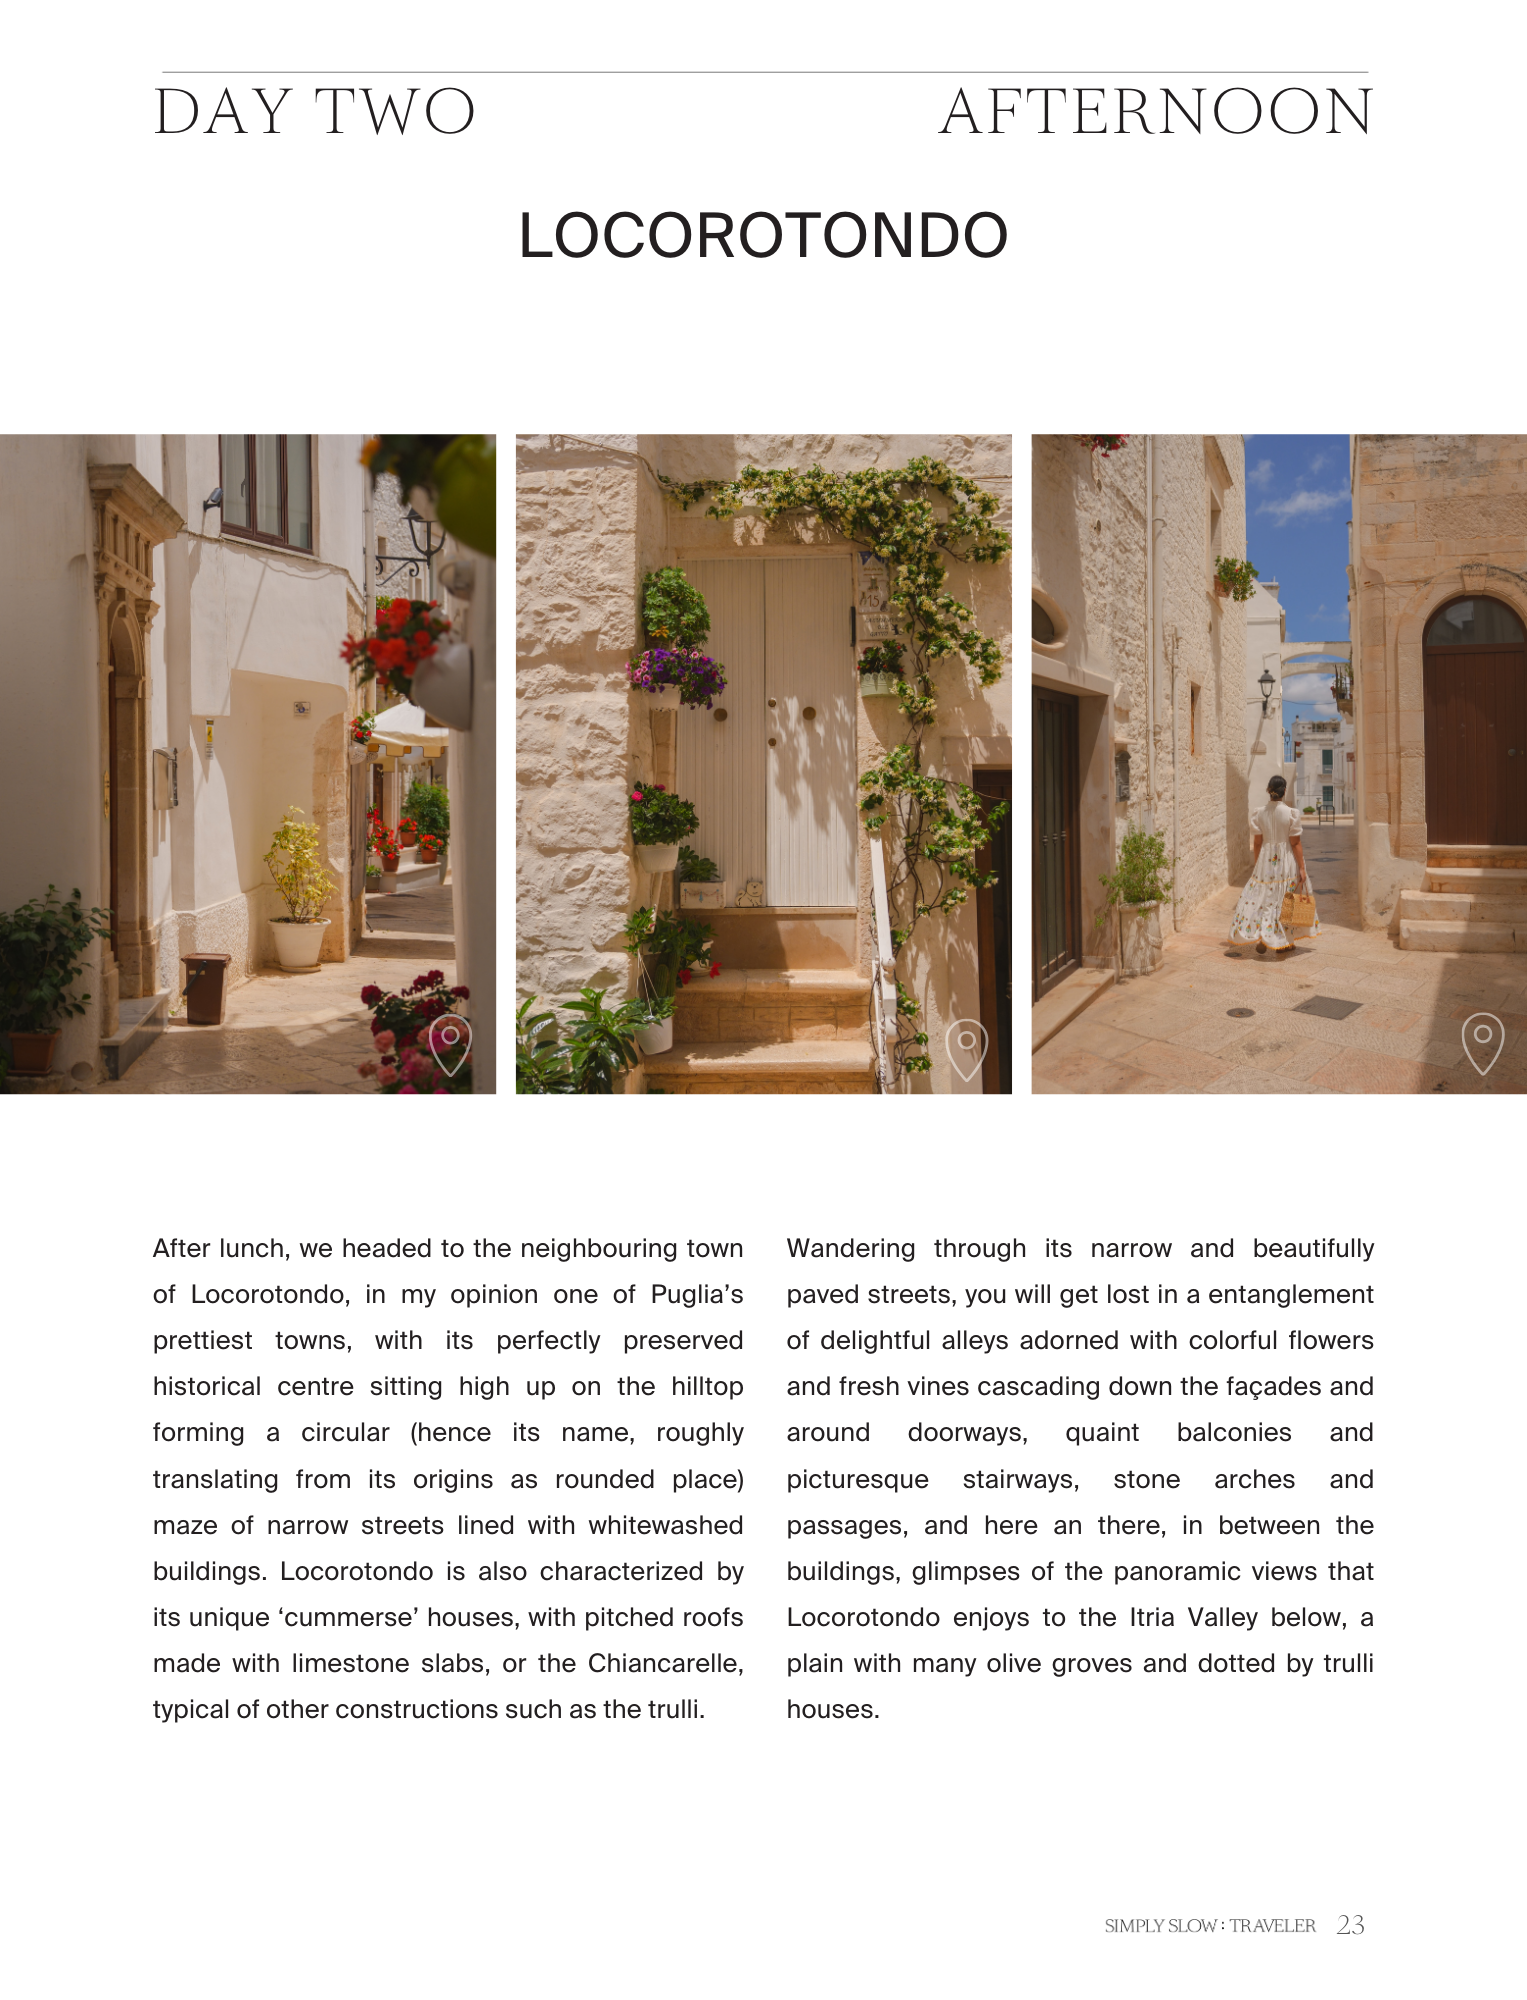 A Guide to Puglia - page dedicated to Locorotondo, by Simply Slow Traveler